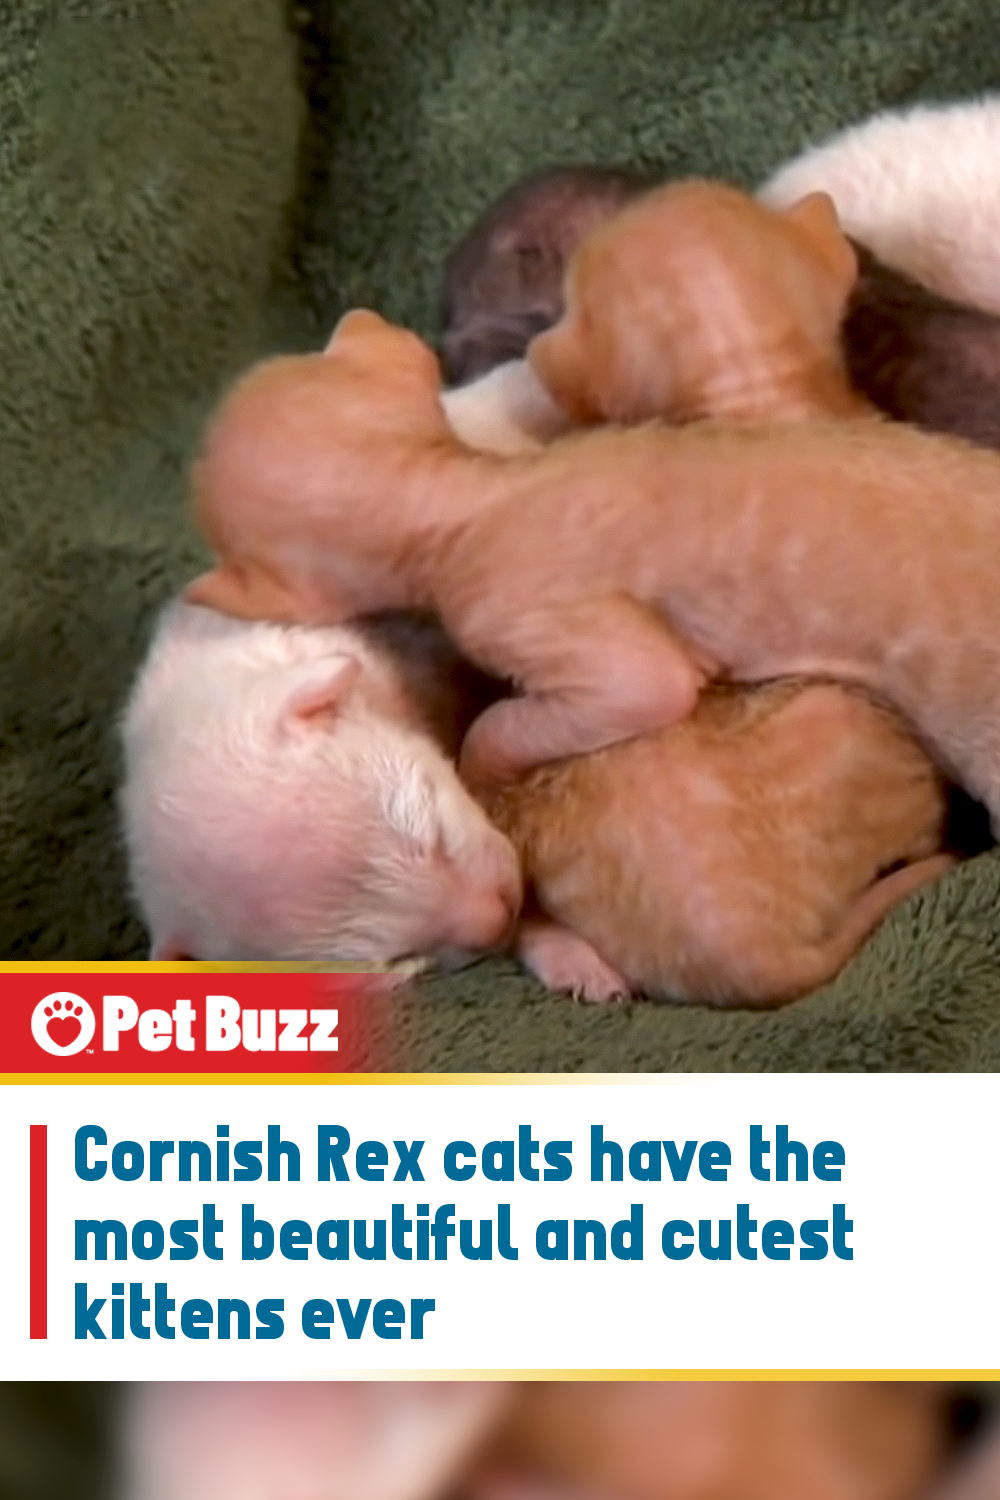 Cornish Rex cats have the most beautiful and cutest kittens ever